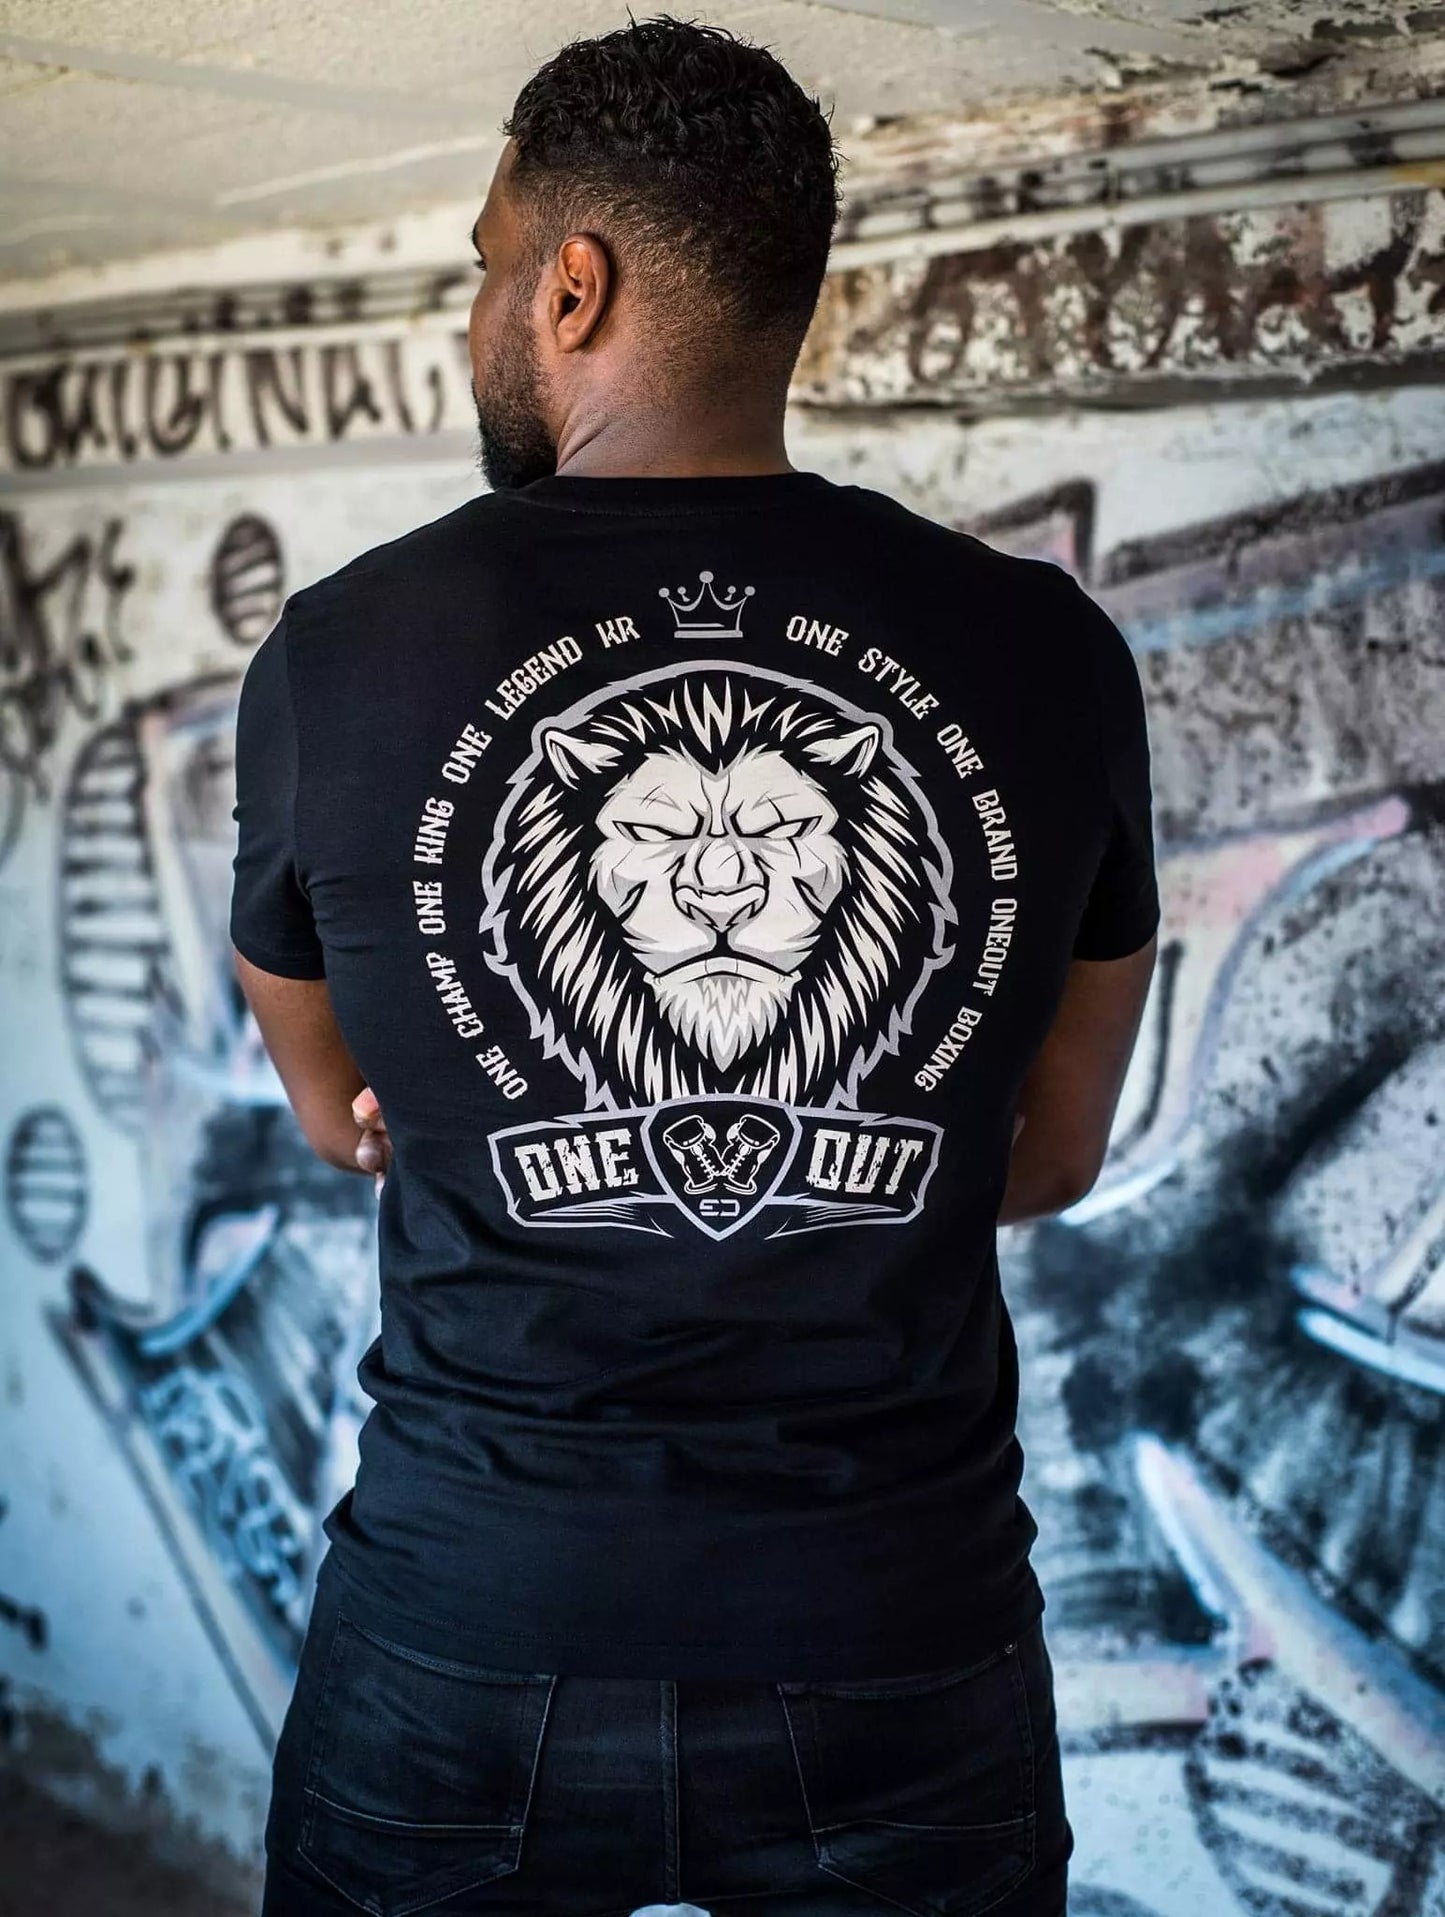 Tee-Shirt Oneout One King One Legend – Noir